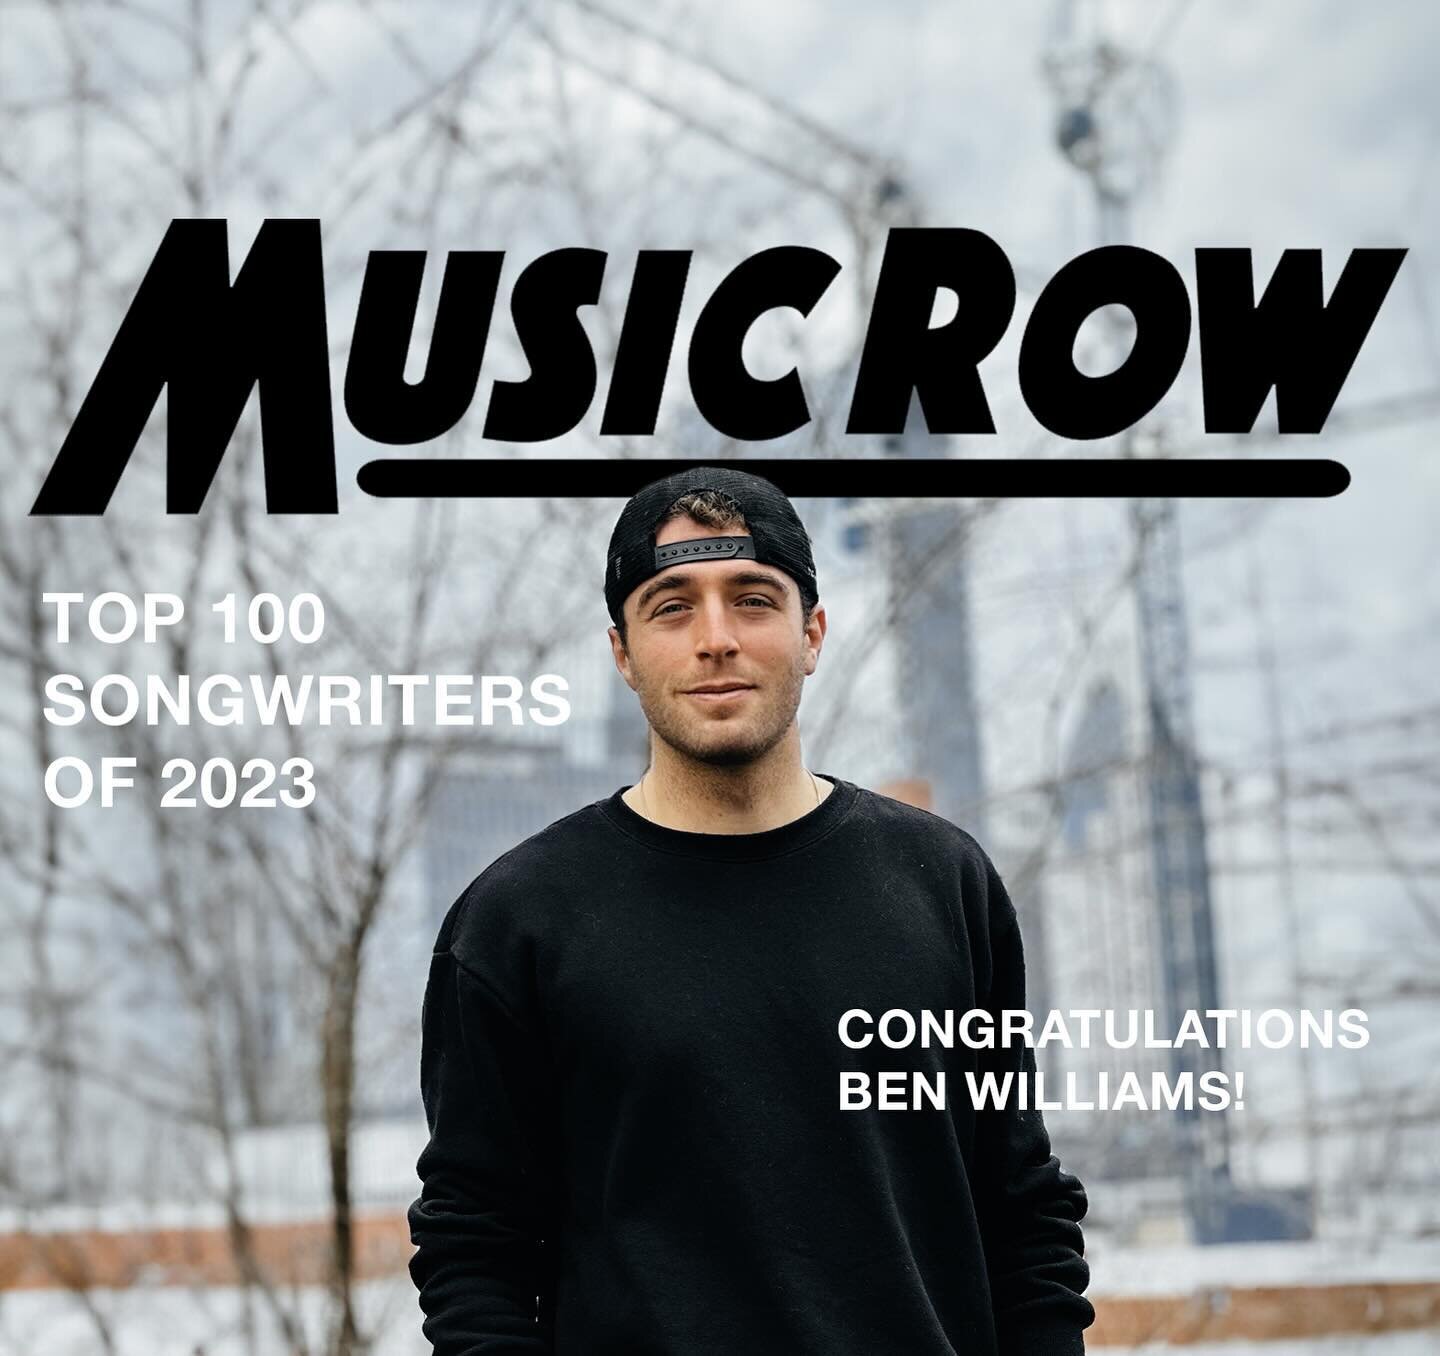 Congratulations Ben Williams on being named to the MusicRow Top 100 Songwriters of 2023!!